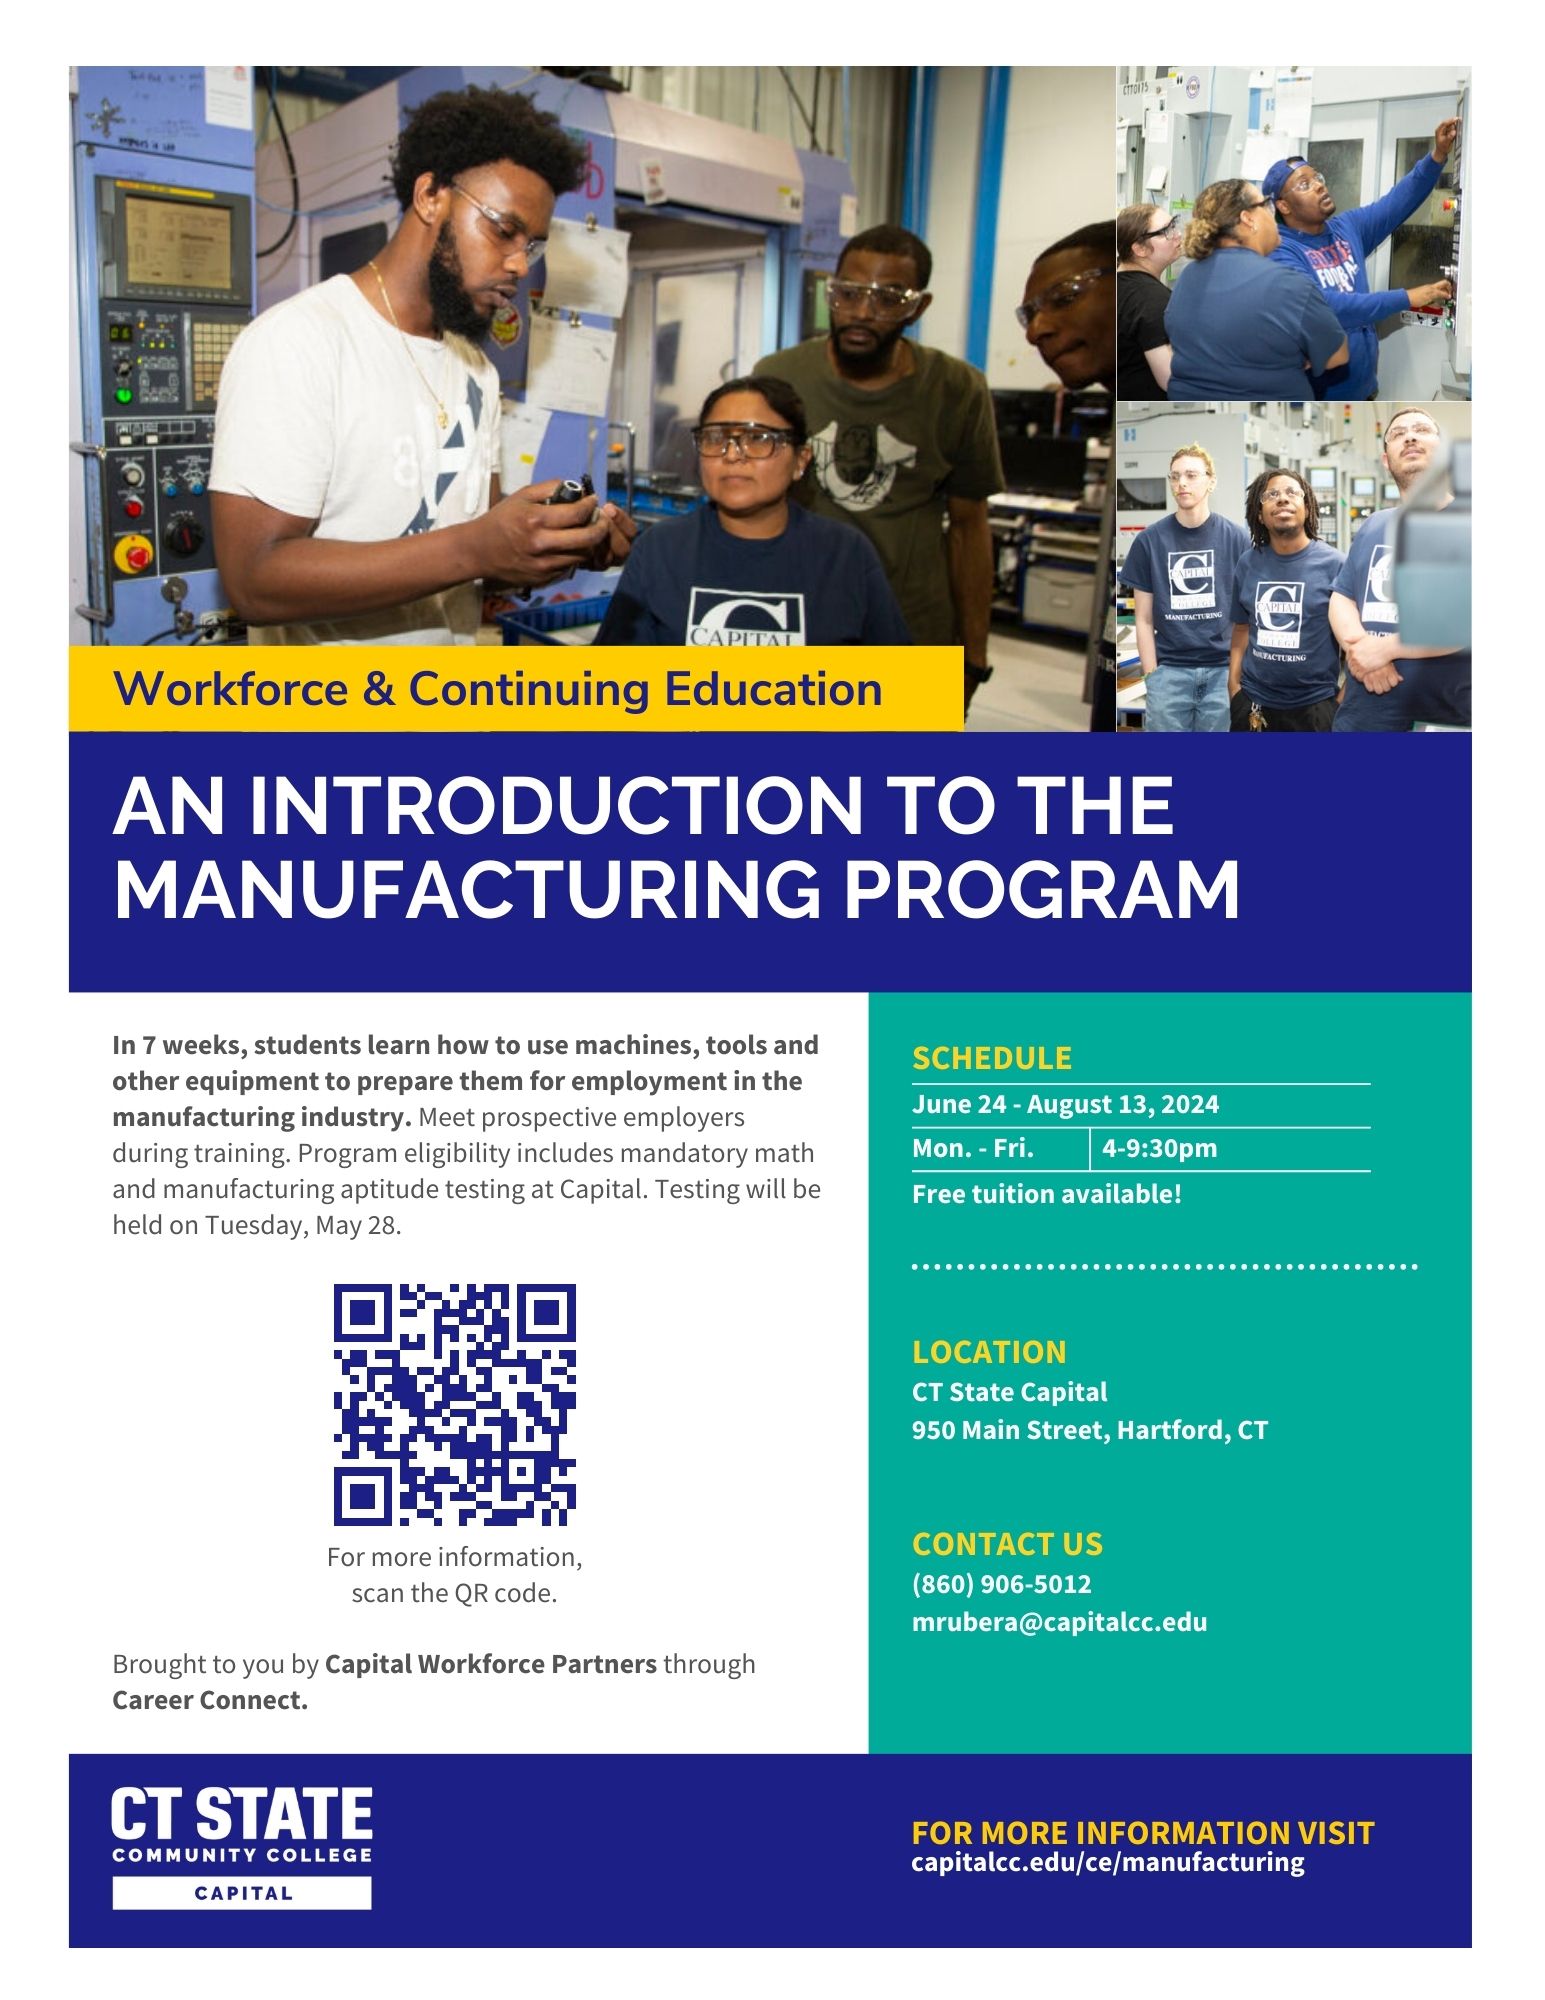 An introduction to the manufacturing program.